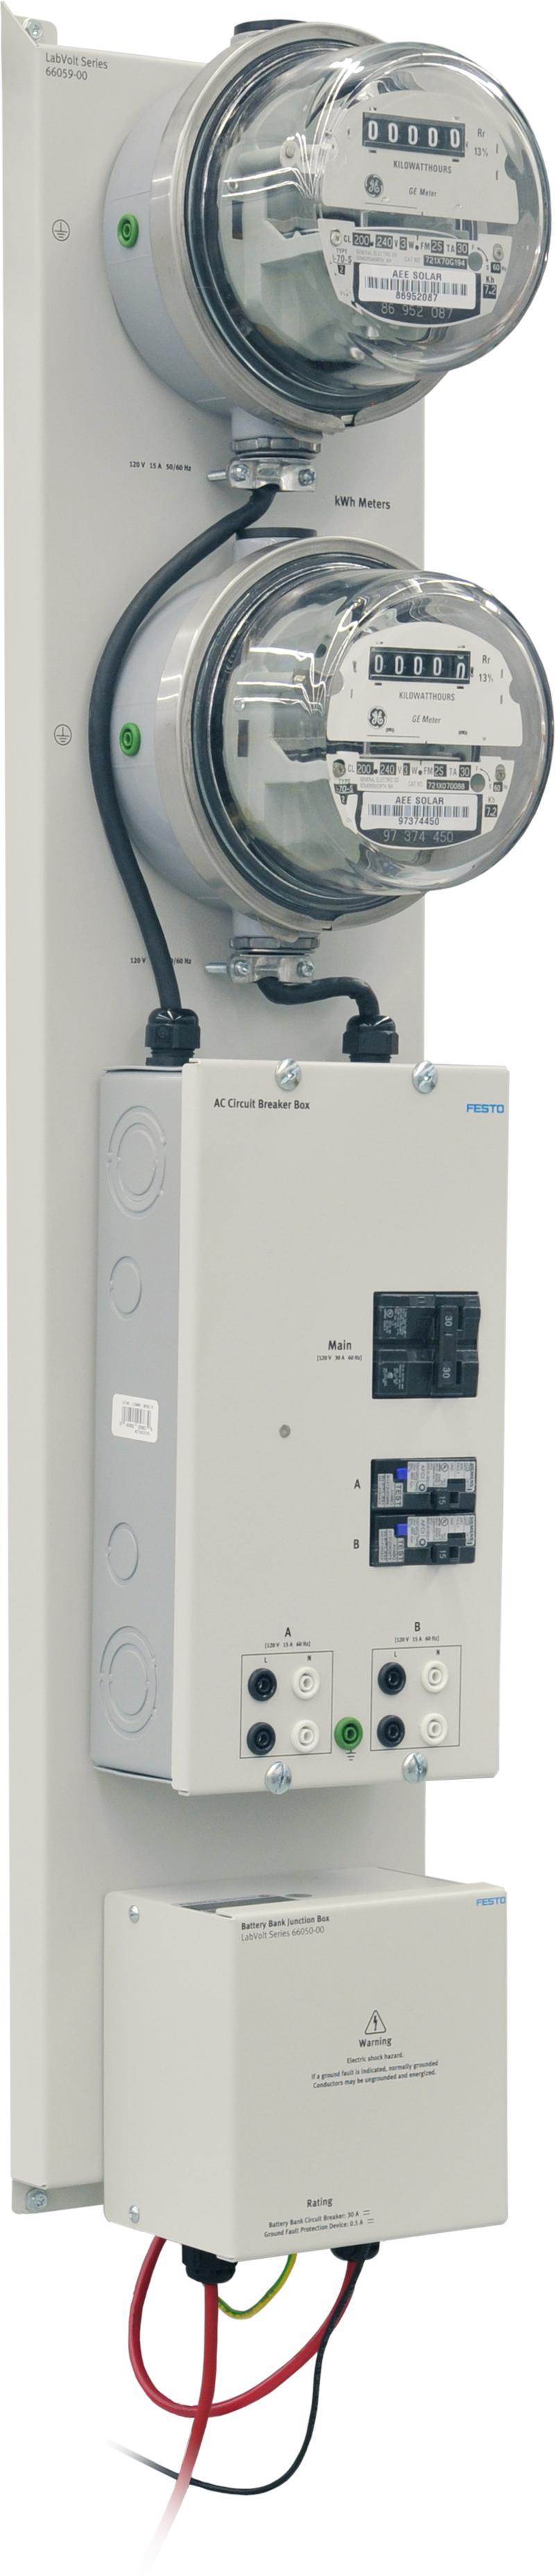 kwh Meters with AC Circuit Breaker Box 66059-00 The kwh Meters with AC Circuit Breaker Box consists of two kwh meters and a circuit-breaker box.